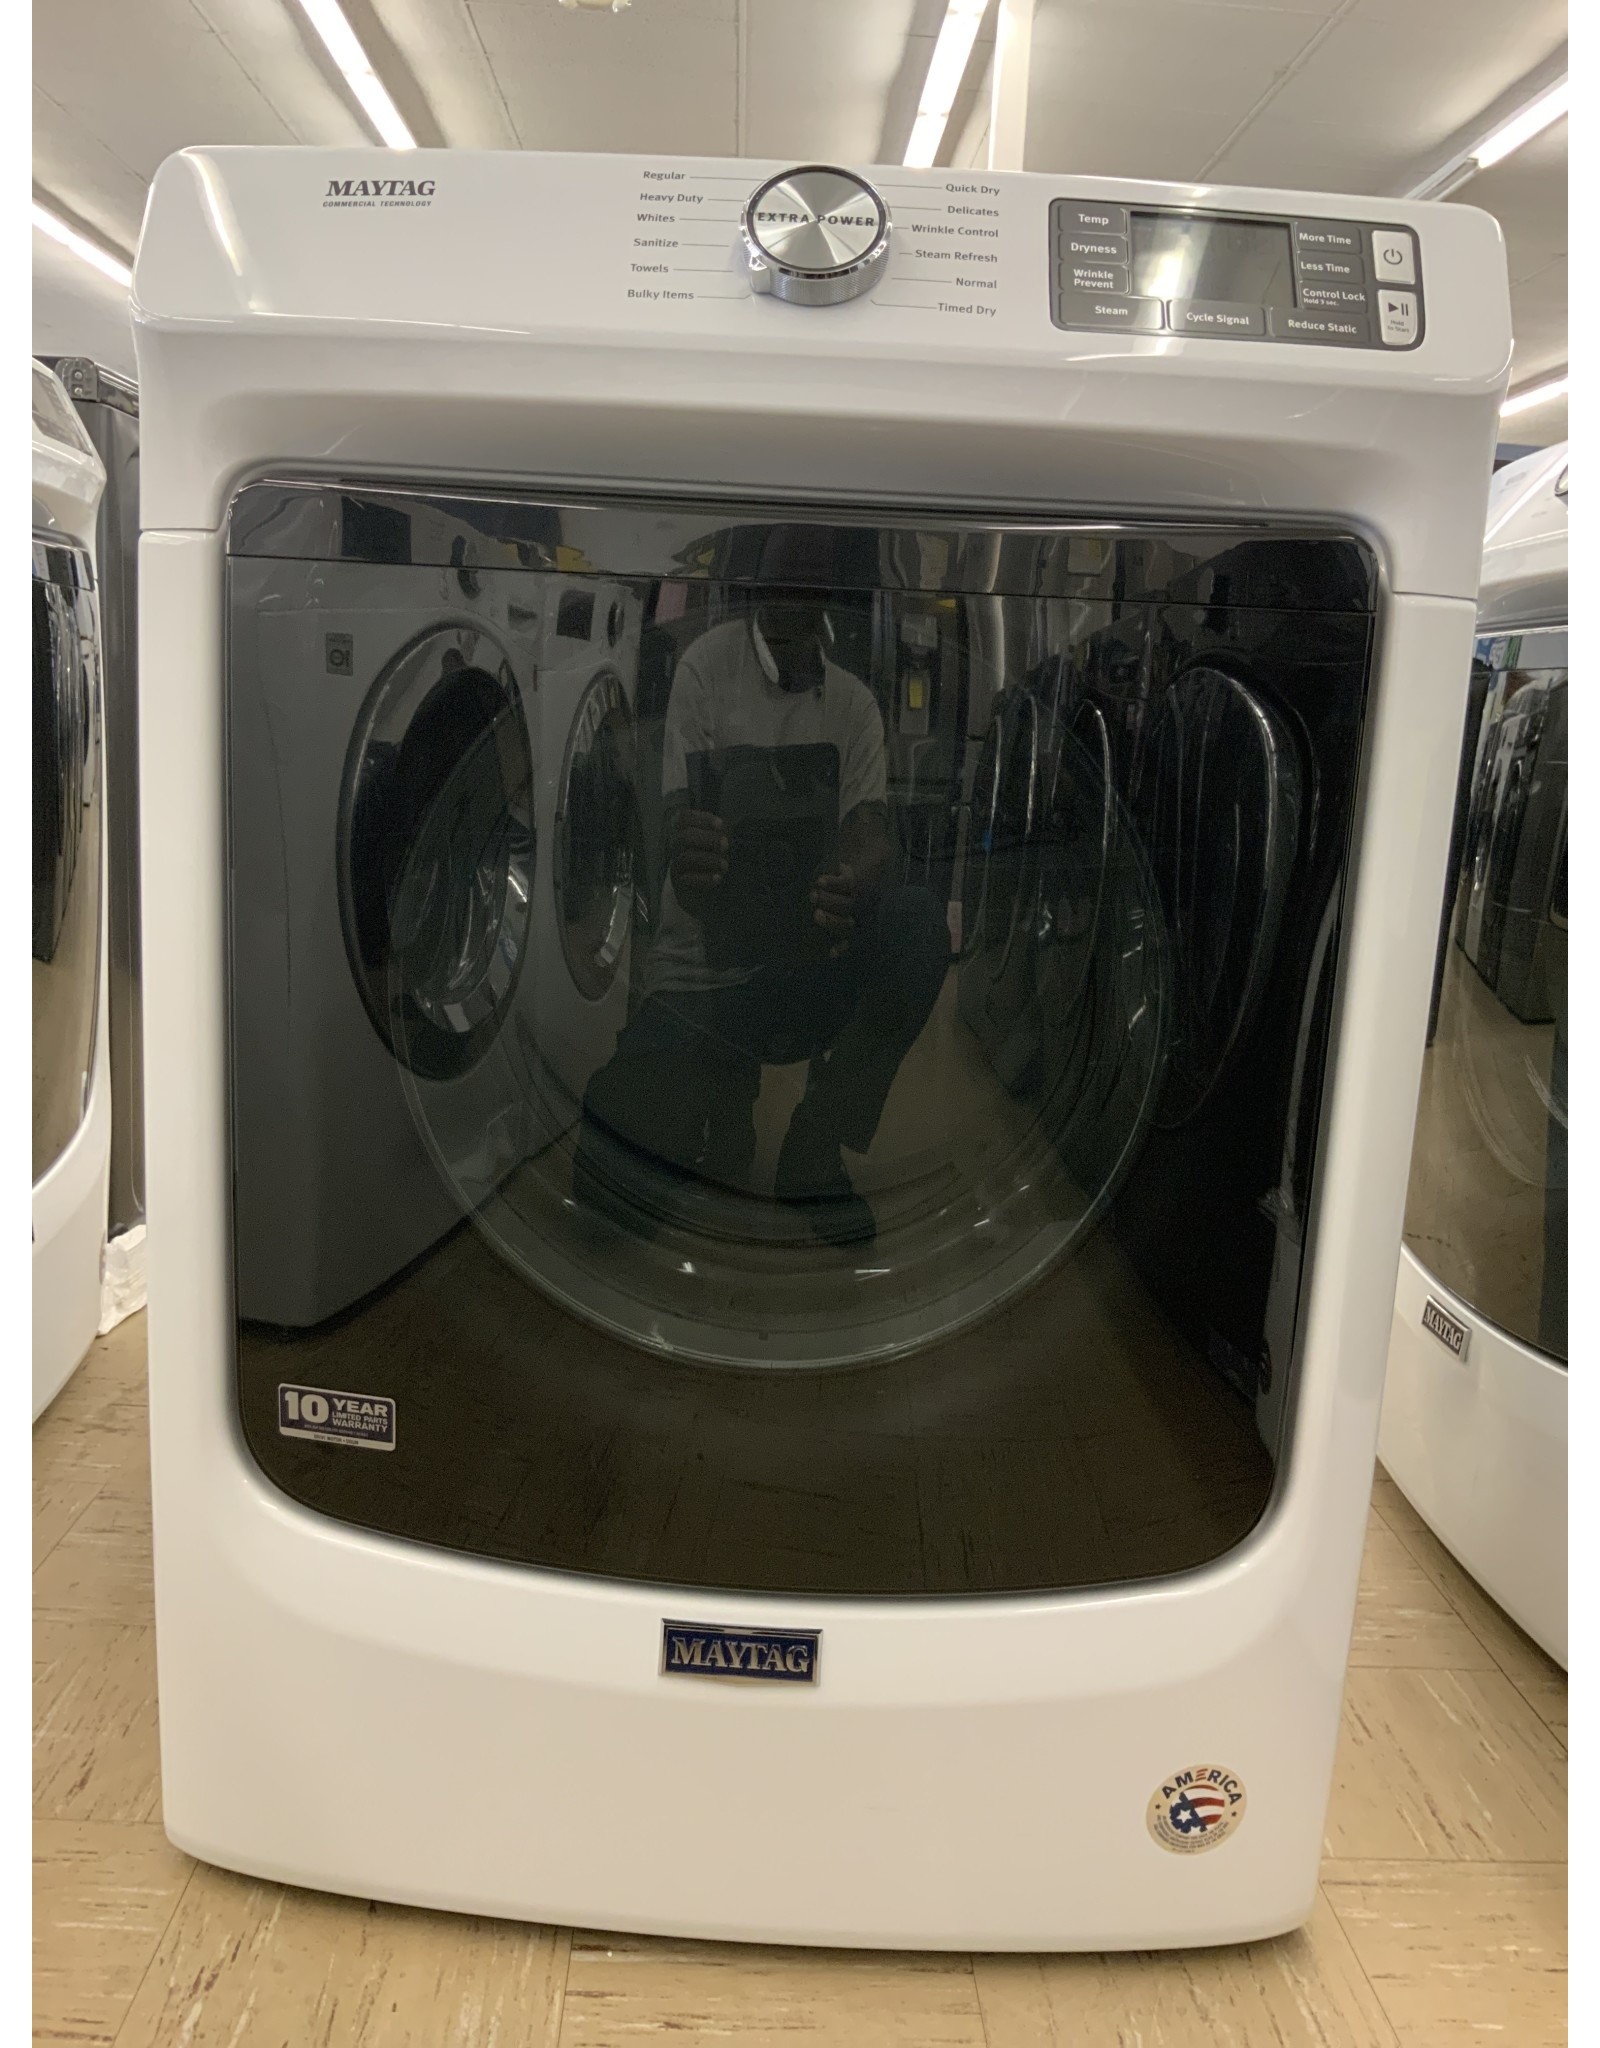 MAYTAG MED5630HW 7.3 cu. ft. 240-Volt White Stackable Electric Vented Dryer with Quick Dry Cycle, ENERGY STAR